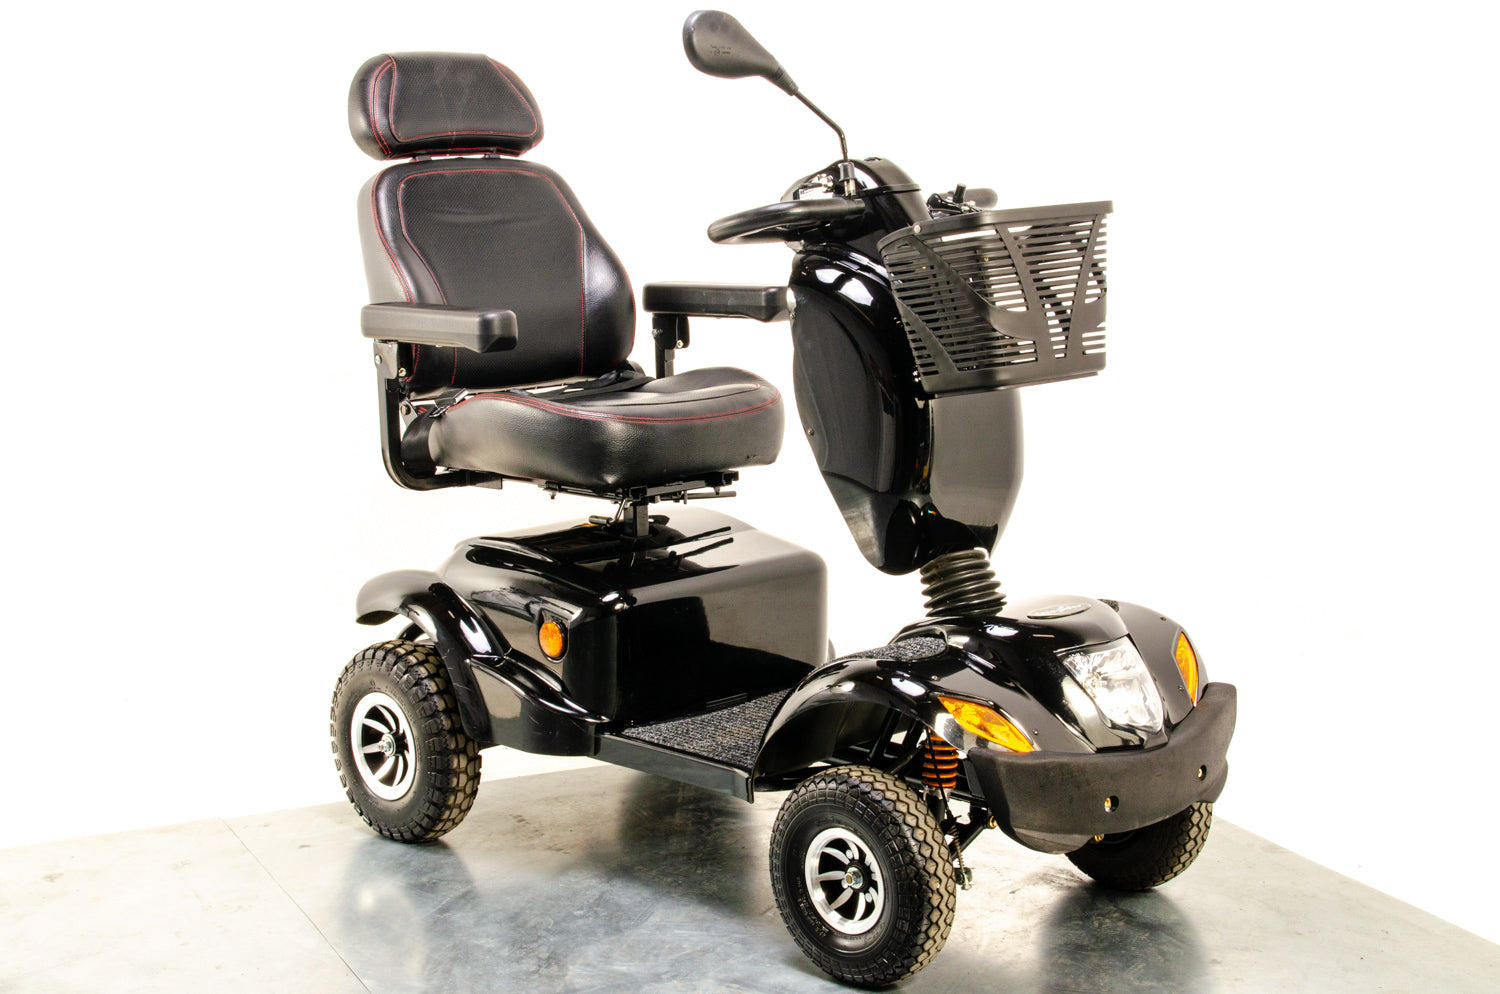 Freerider Landranger XL8 8mph Used Mobility Scooter All-Terrain Off-Road Road Legal Large 13081